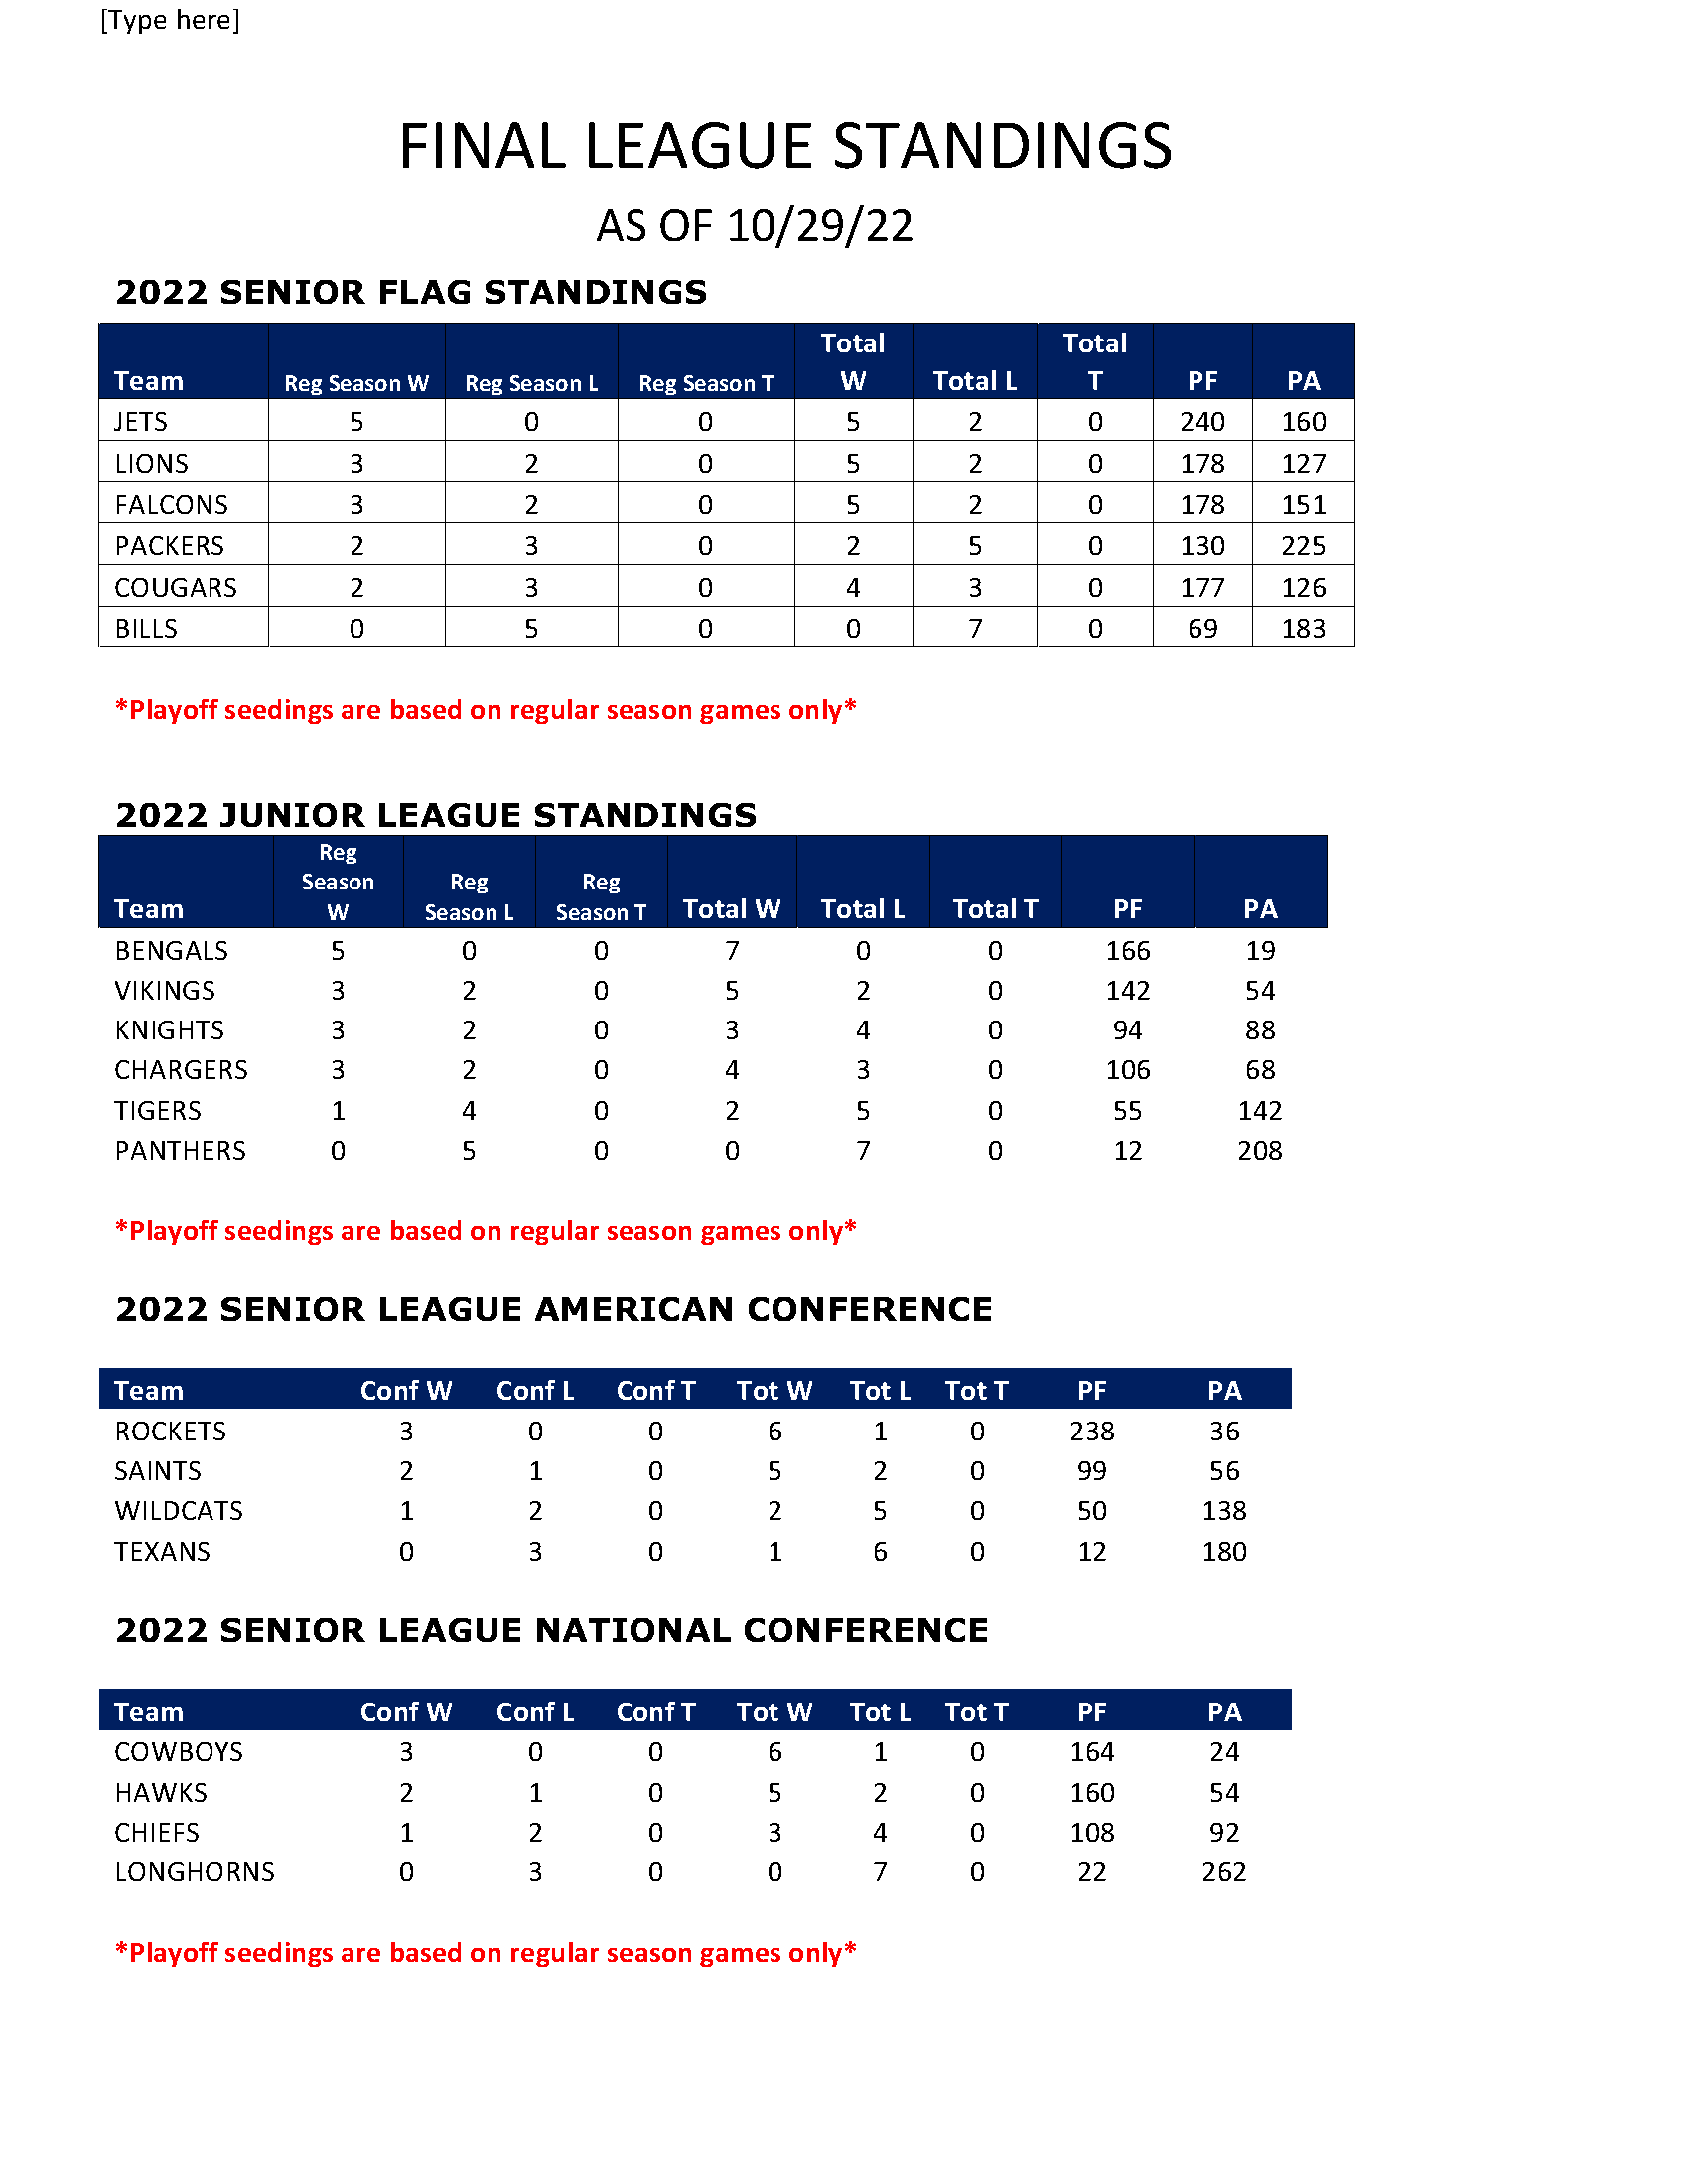 View Standings